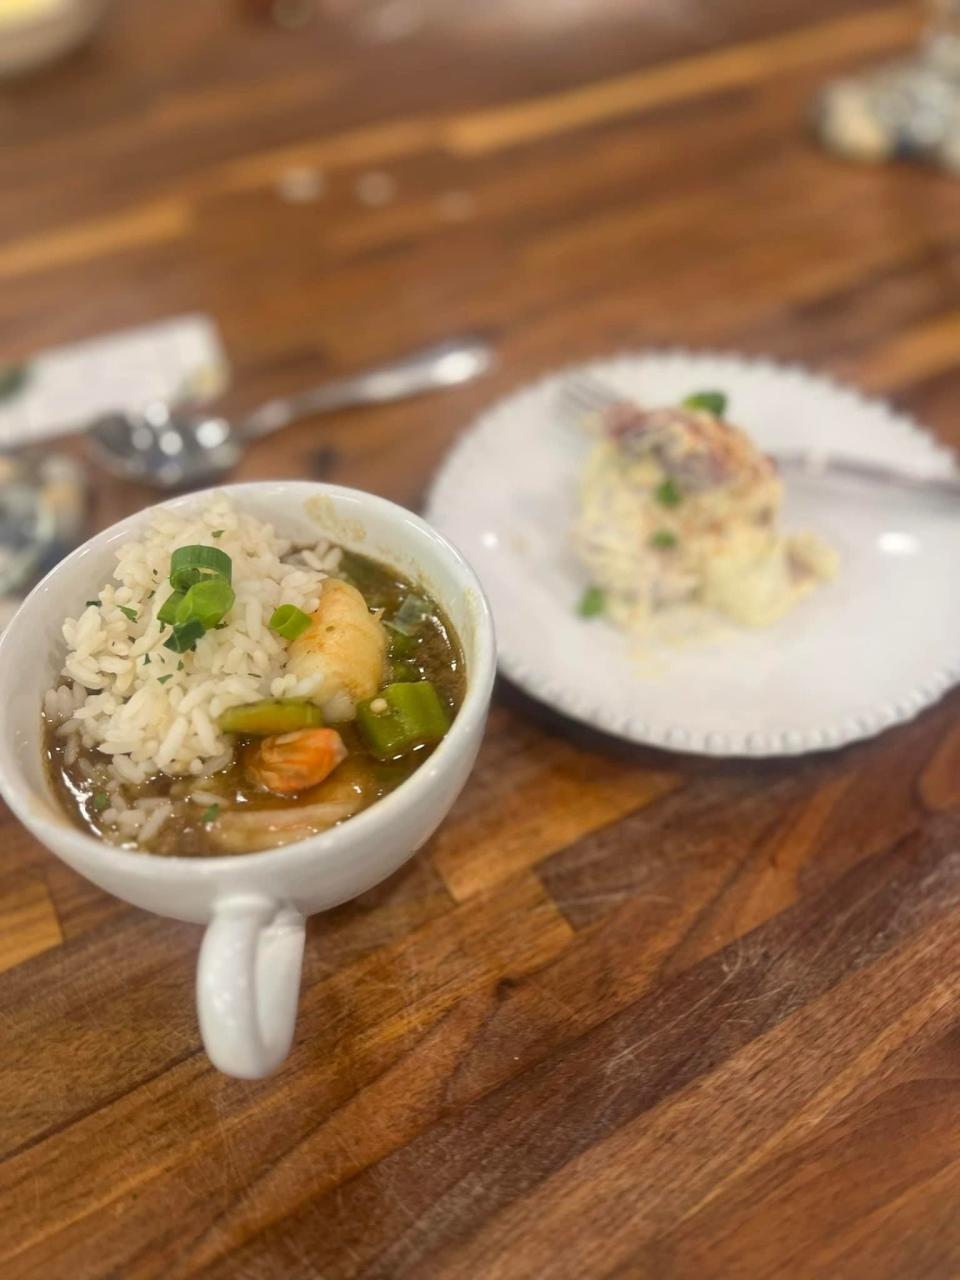 Louisiana-style seafood gumbo prepared by Felisha Williams Nicholson, owner of the FE-Nomenal Cooking Experience.